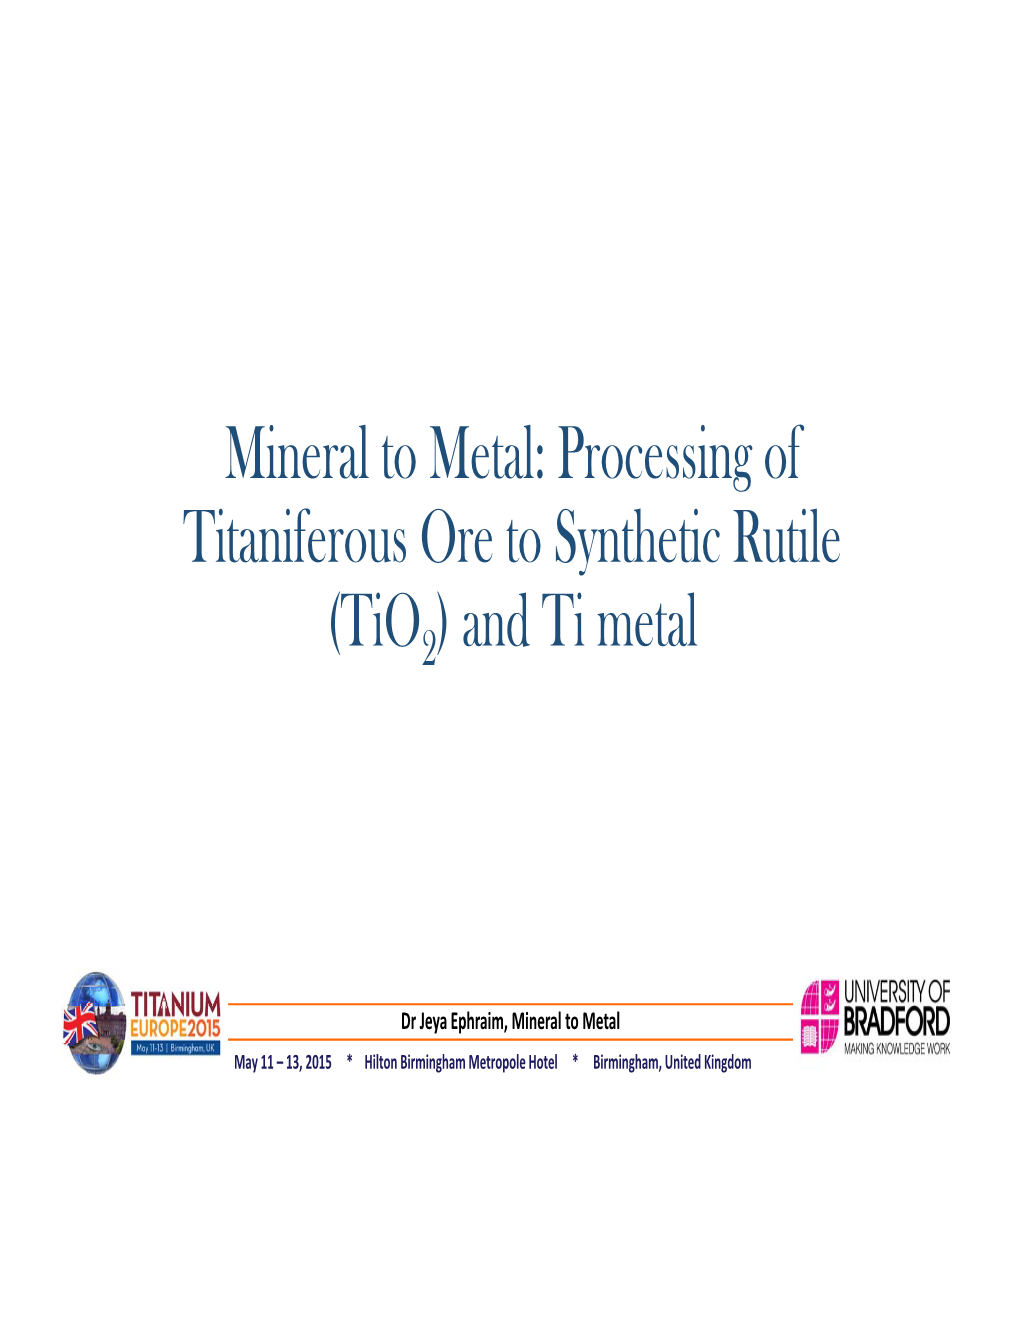 Mineral to Metal: Processing of Titaniferous Ore to Synthetic Rutile (Tio2) and Ti Metal